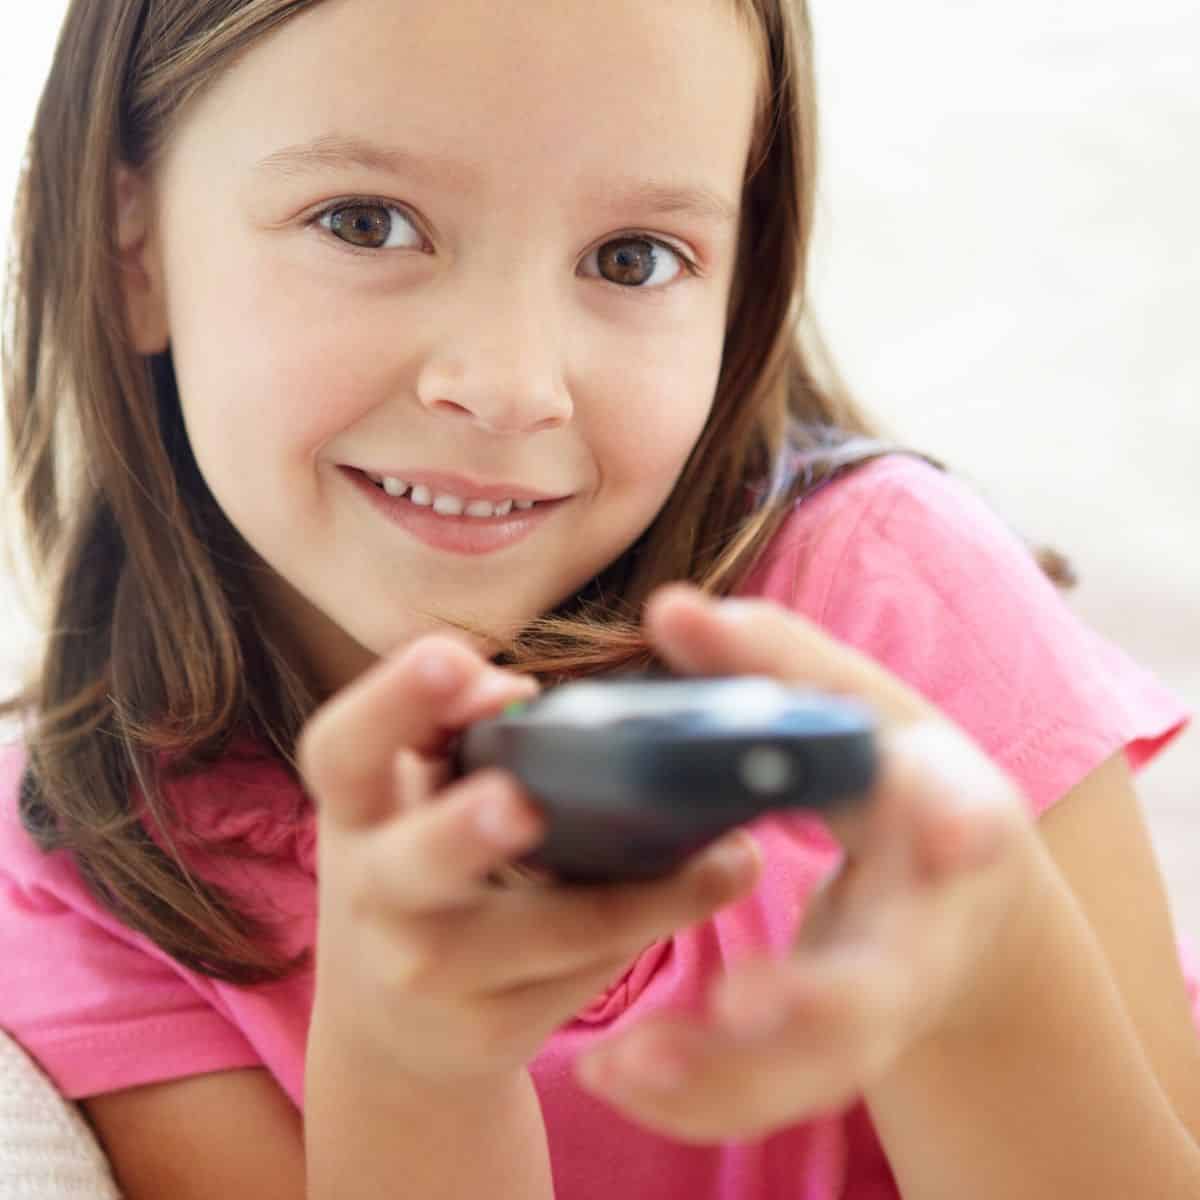 Little girl smiling while holding remote control for television